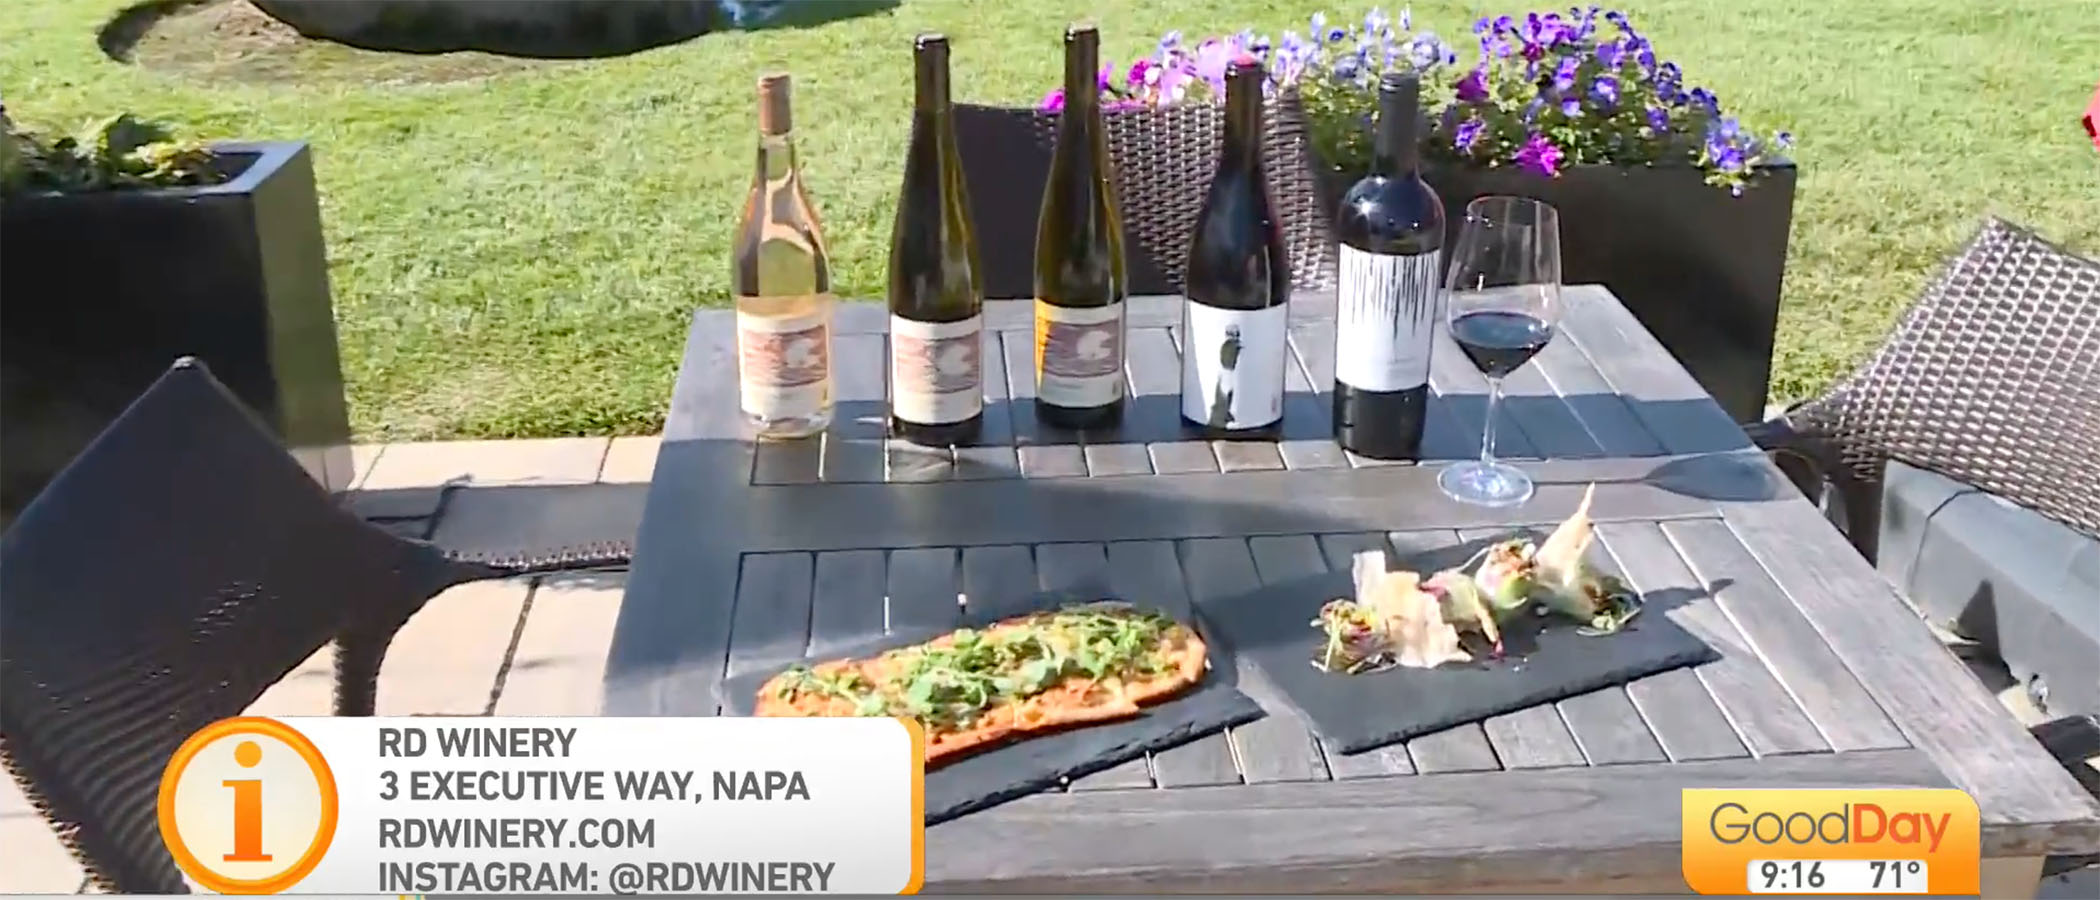 Wine bottles and Asian dishes on outdoor table